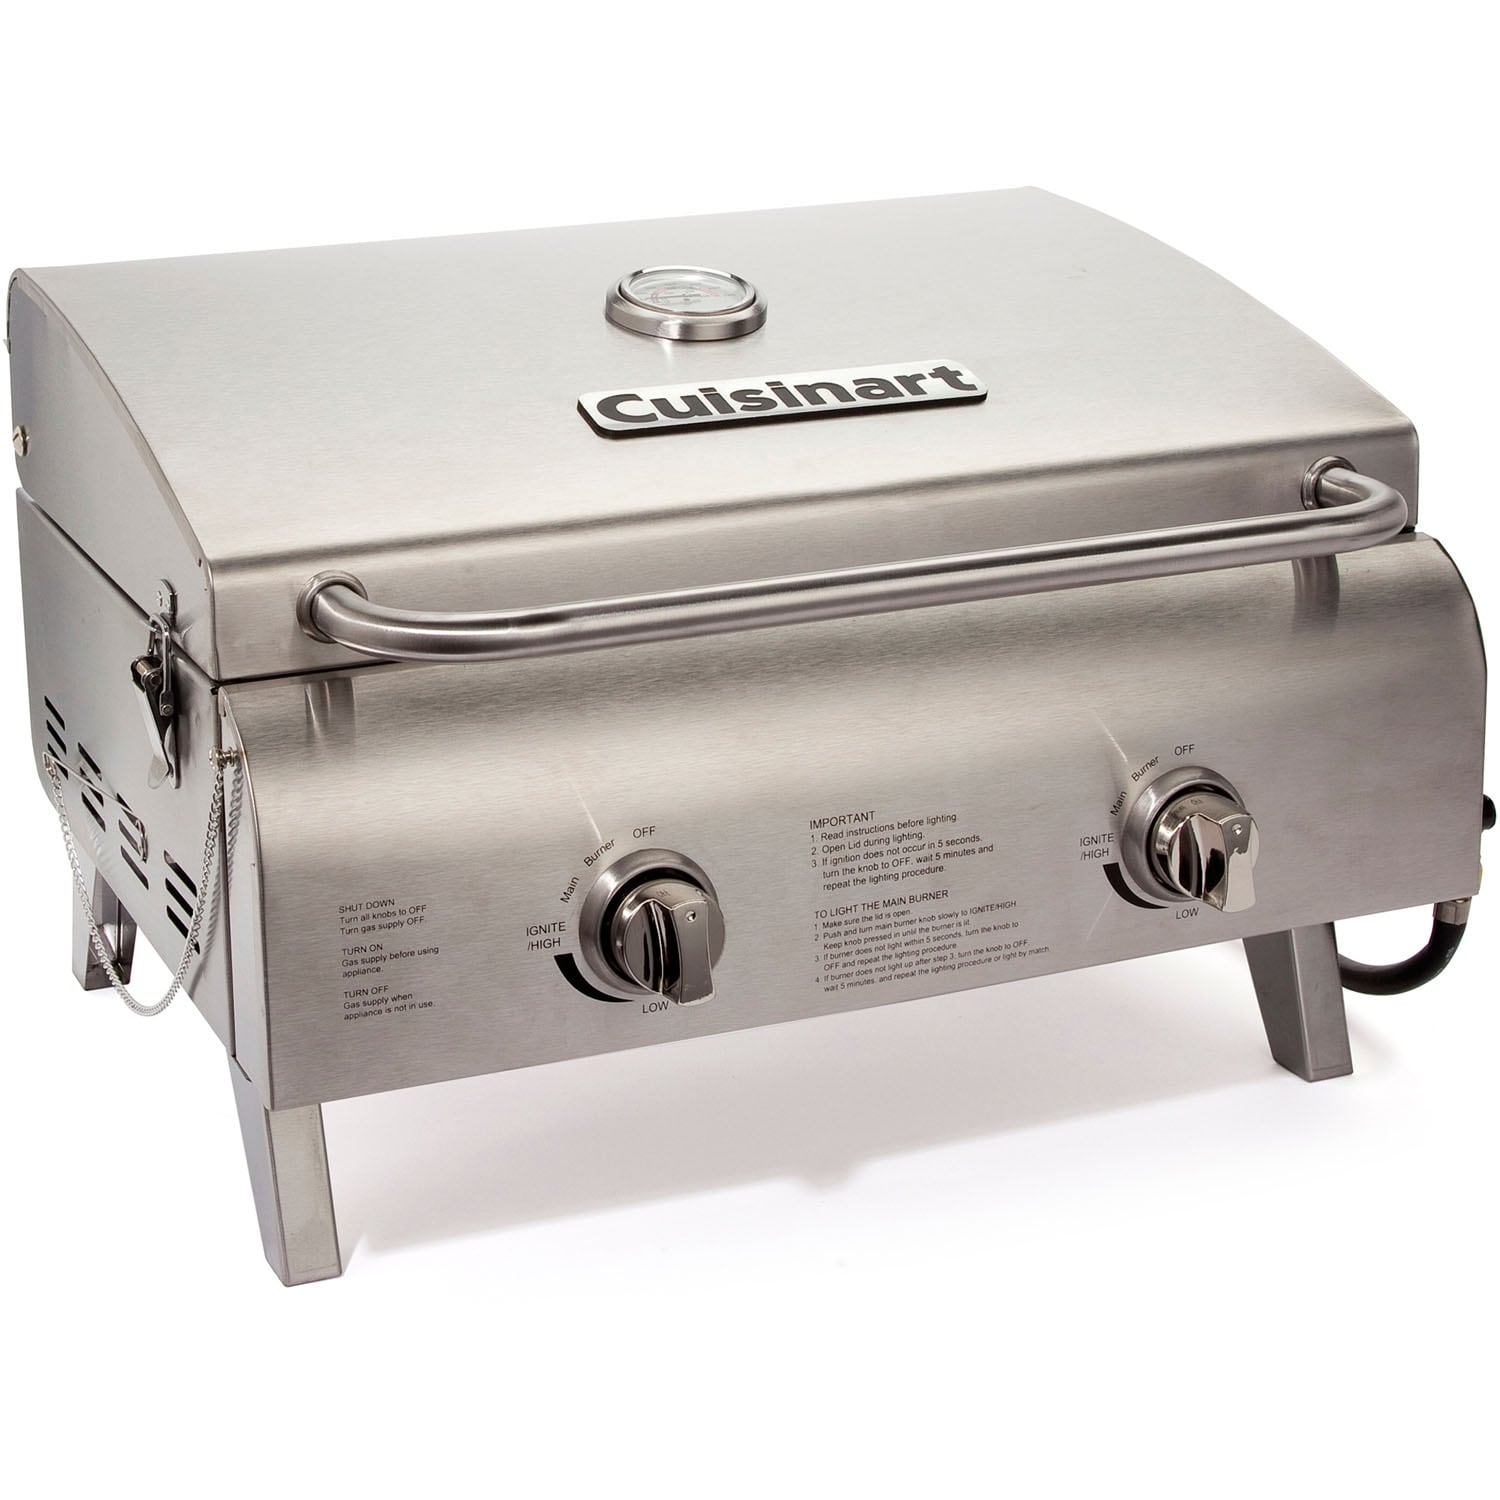 Cuisinart Chef's Style Stainless Gas Grill Bed Bath  Beyond 8814747